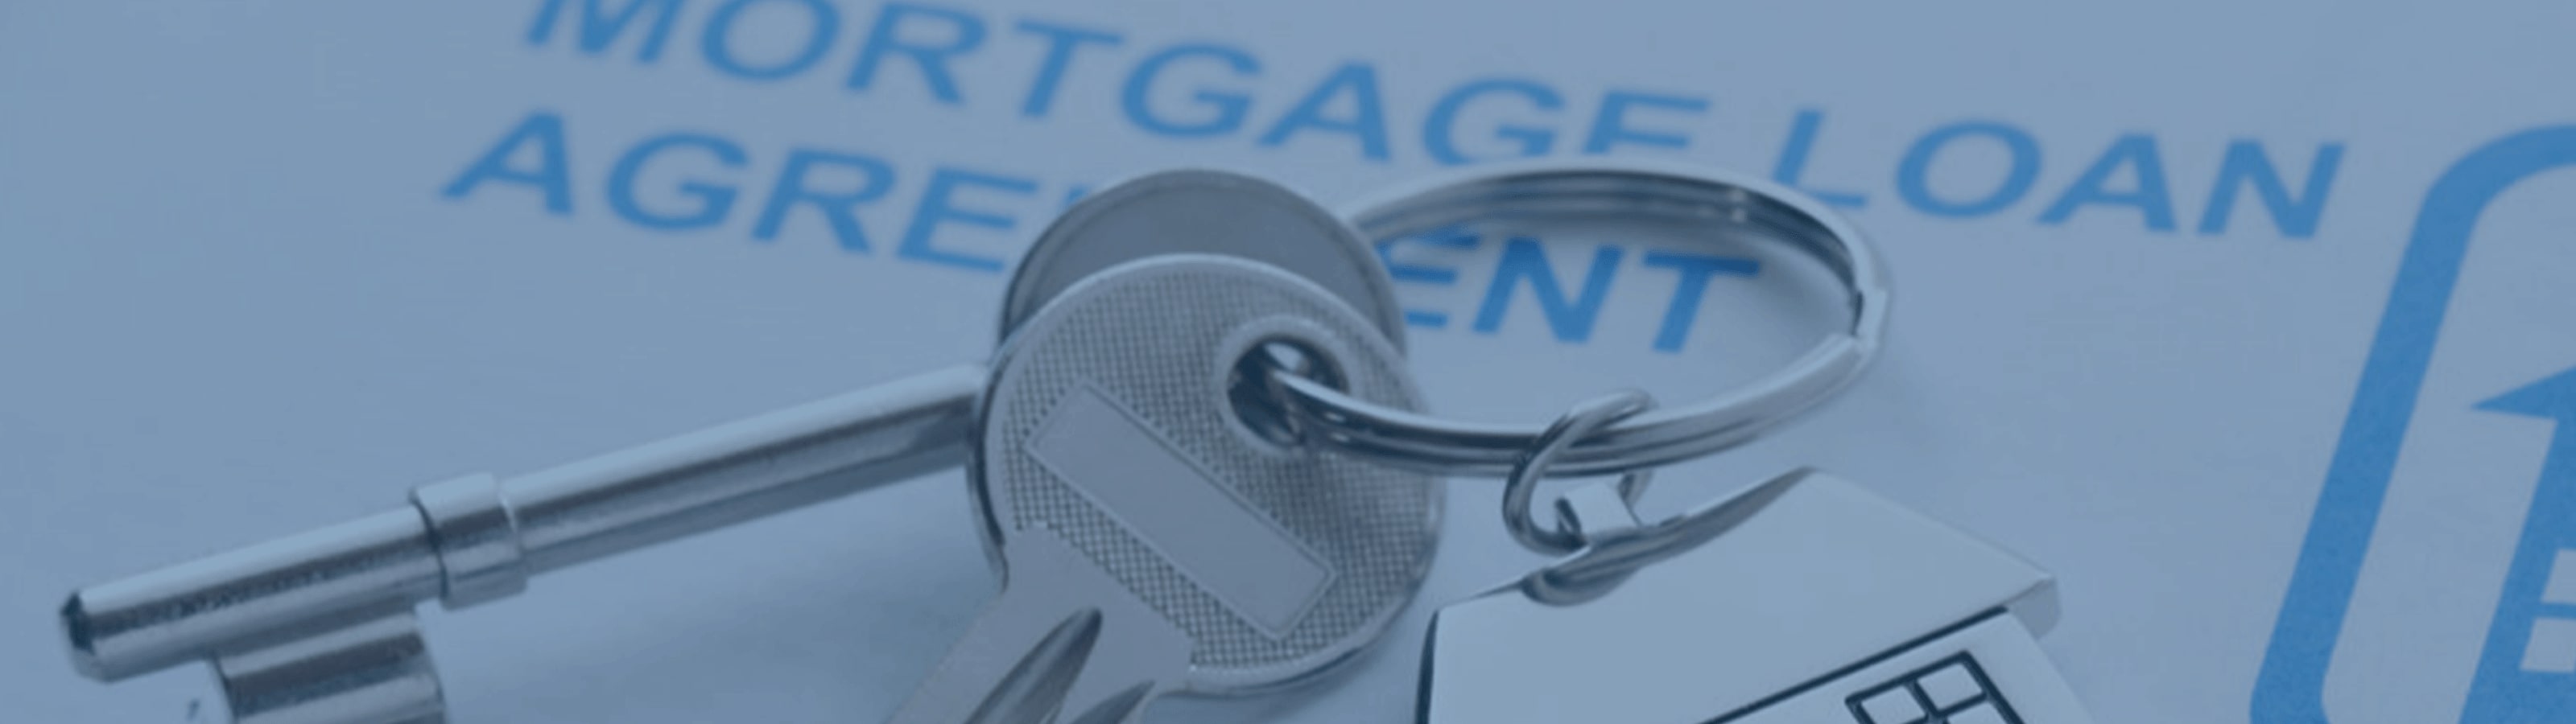 Your best friend in the mortgage industry